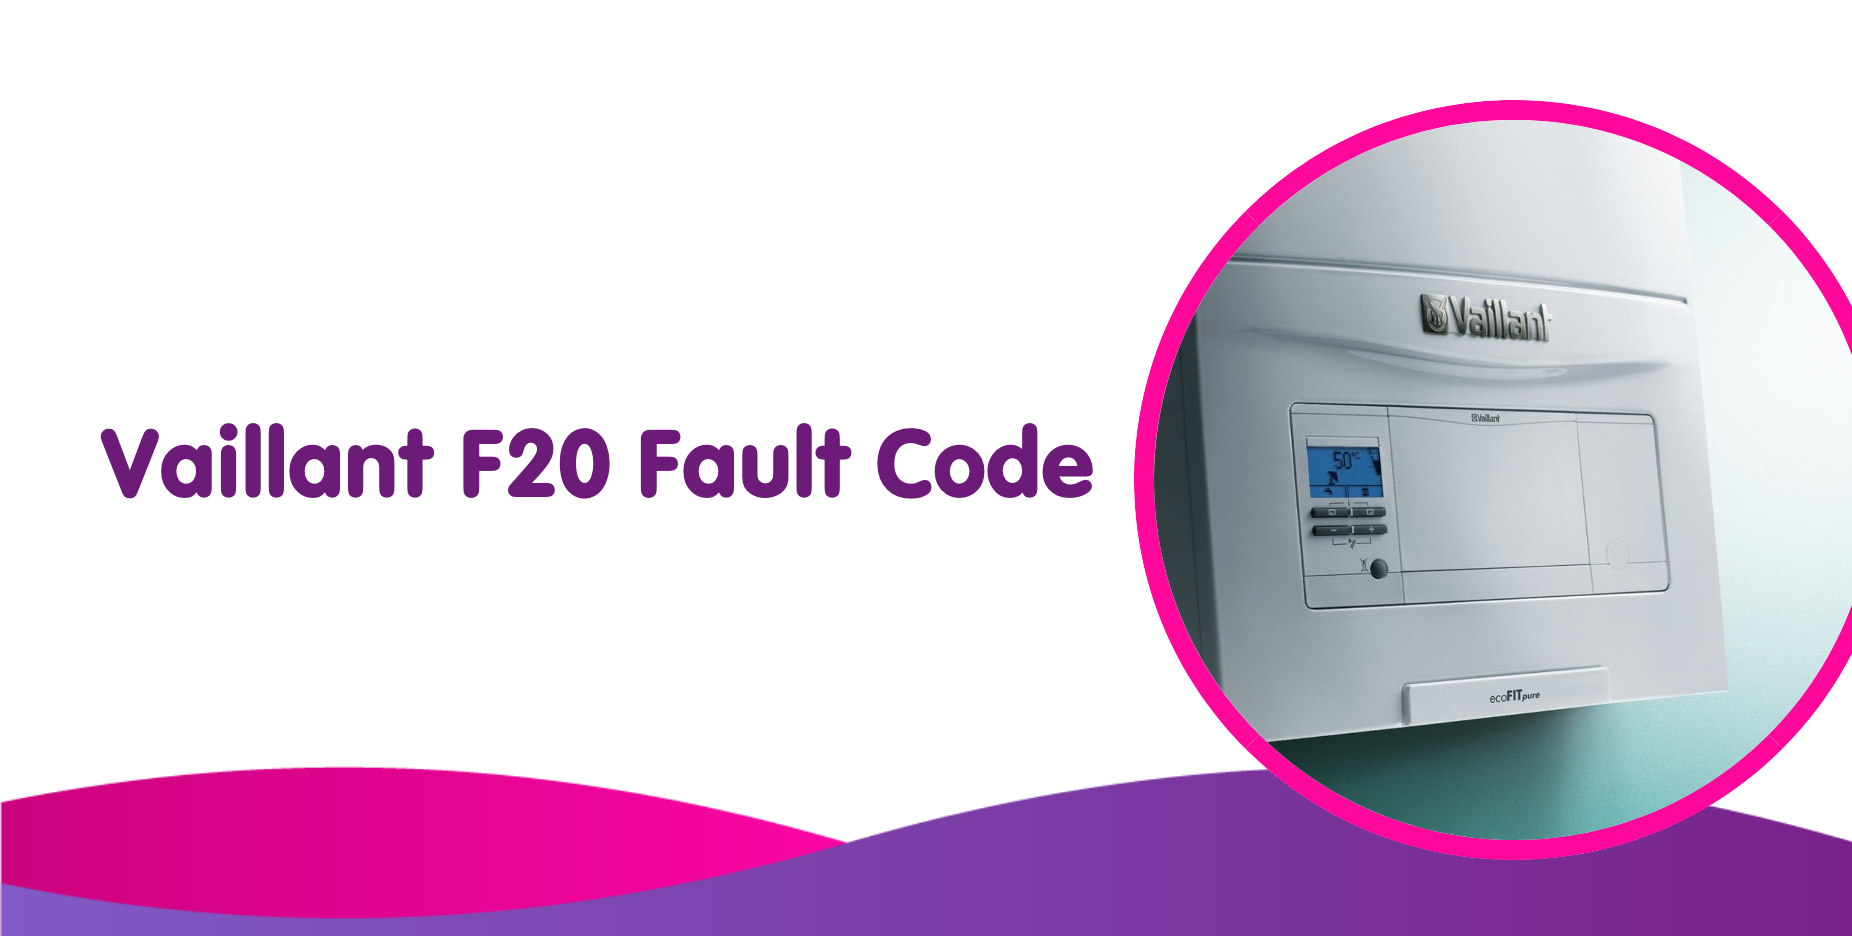 F20 Vaillant Fault Code Meaning, Causes & How To Fix It